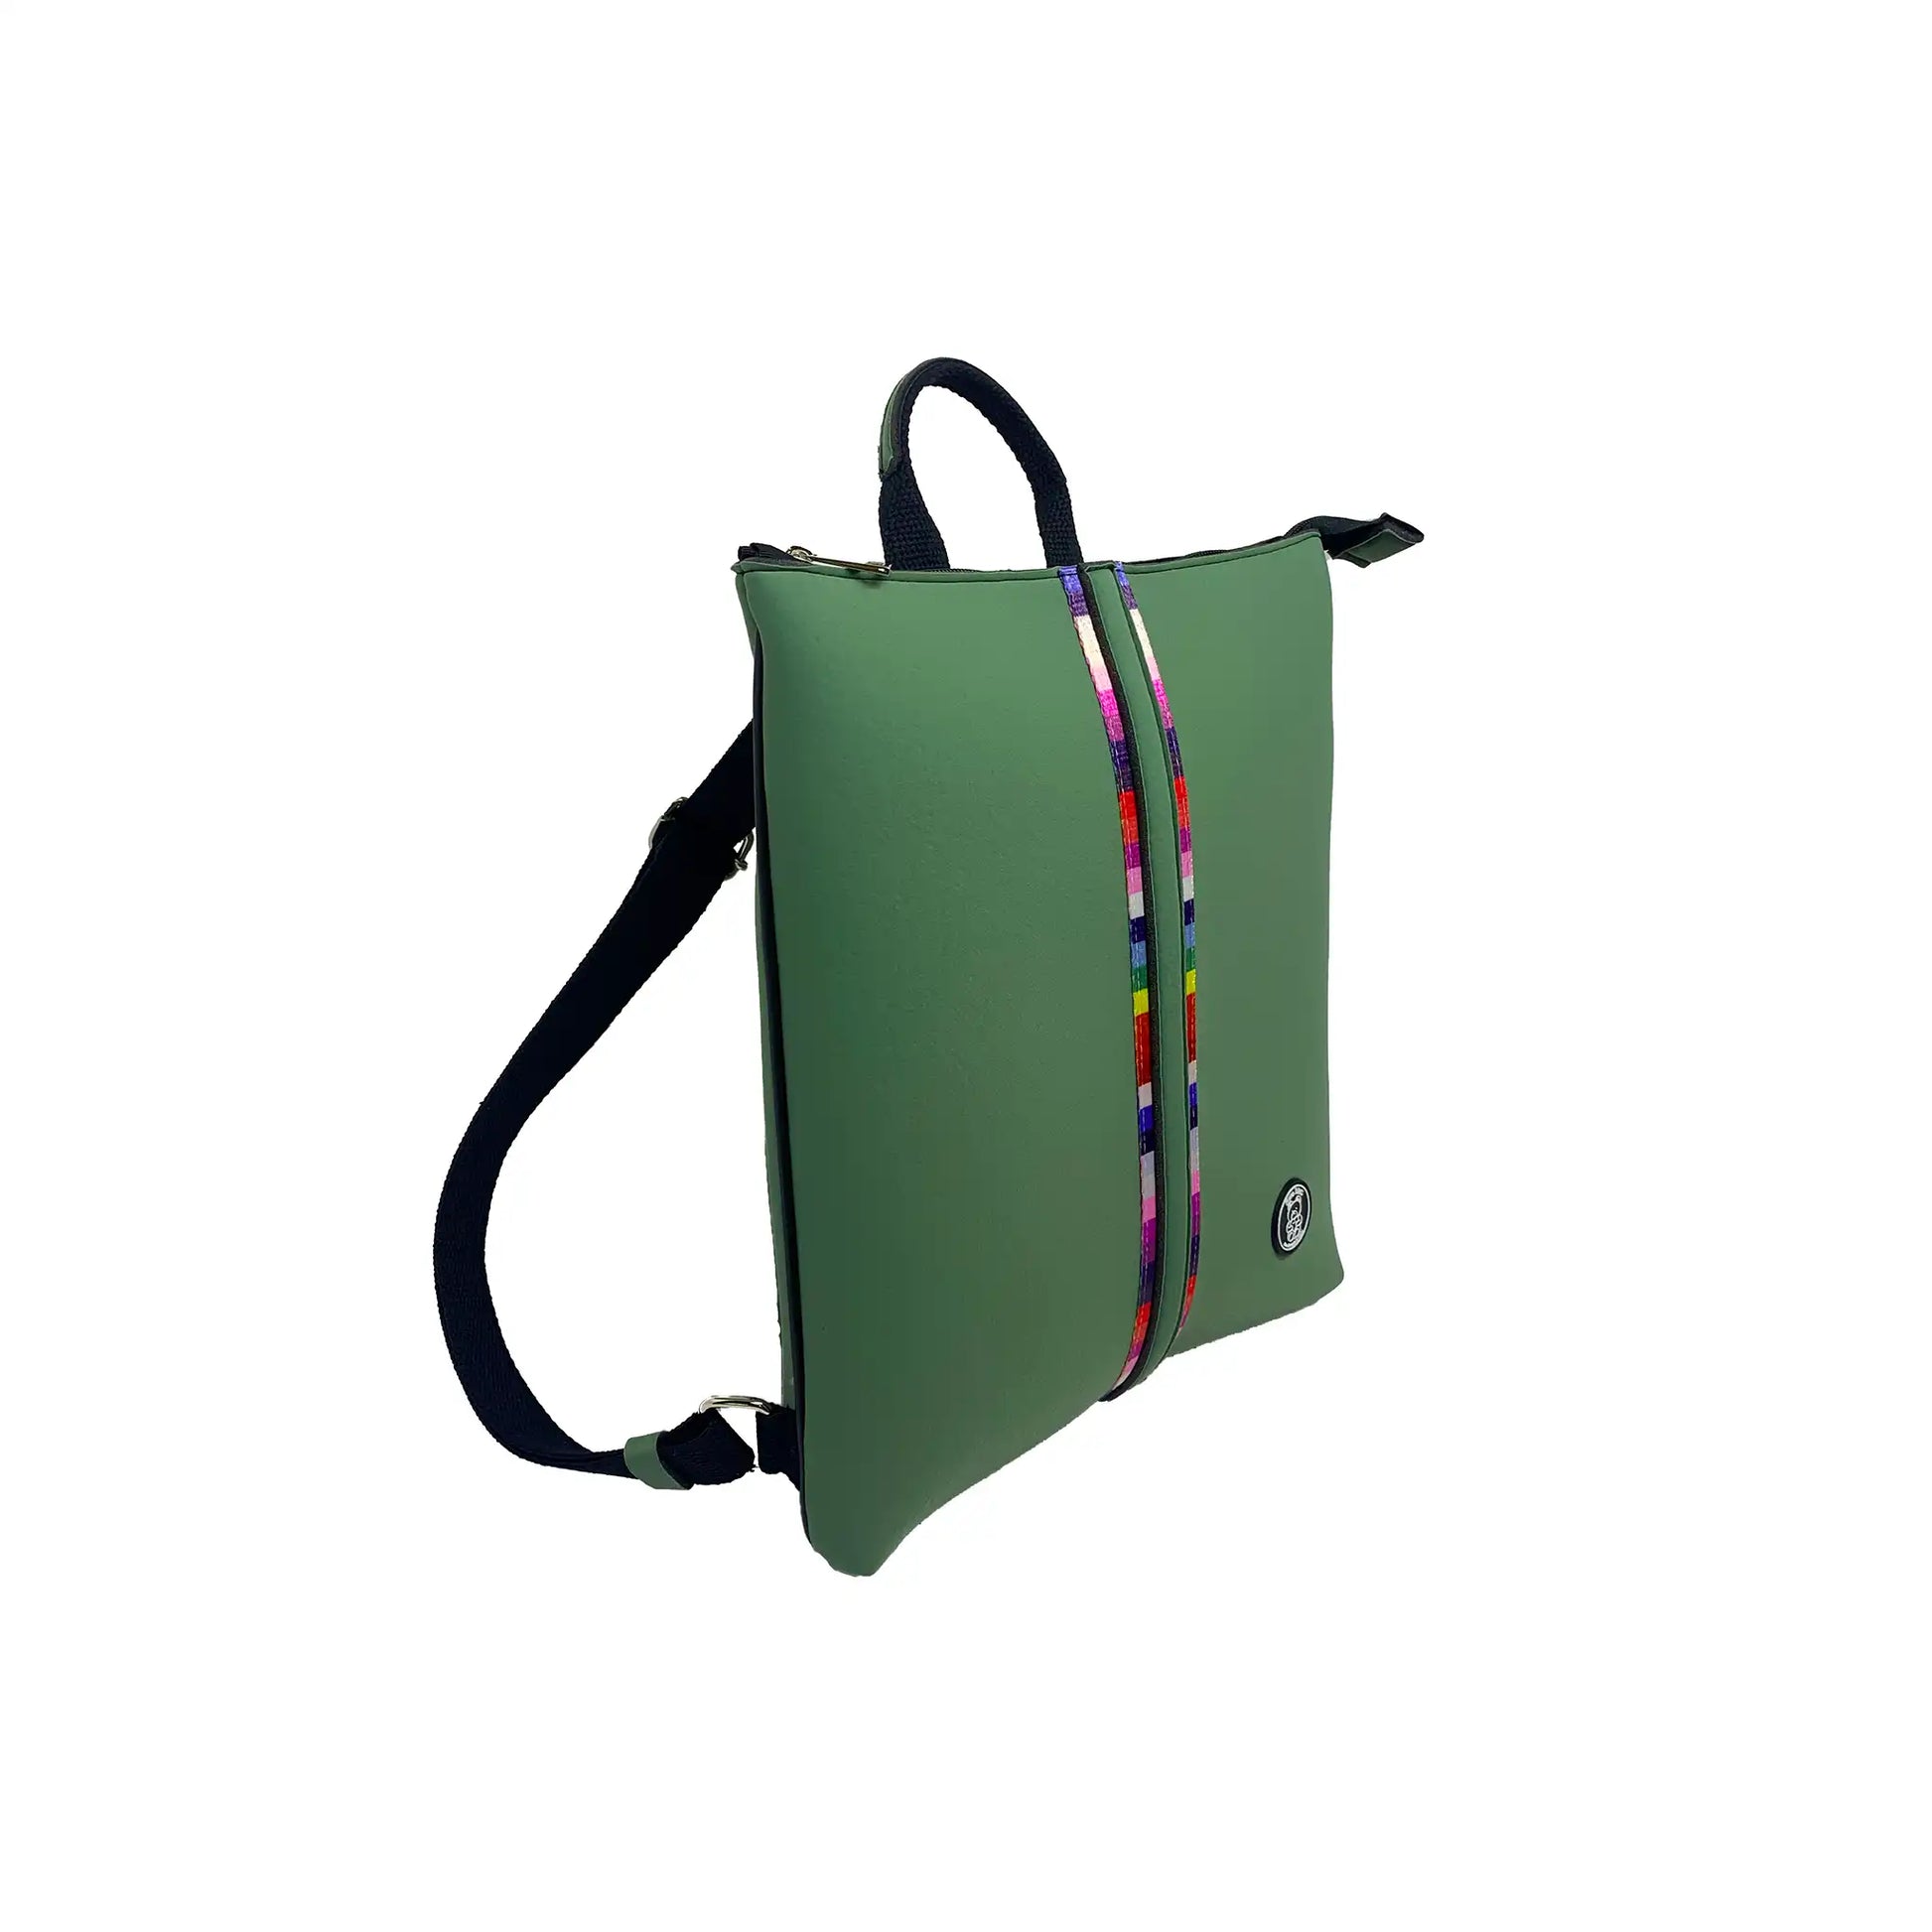 Zainetto Donna Ours Bag (Olive Green)